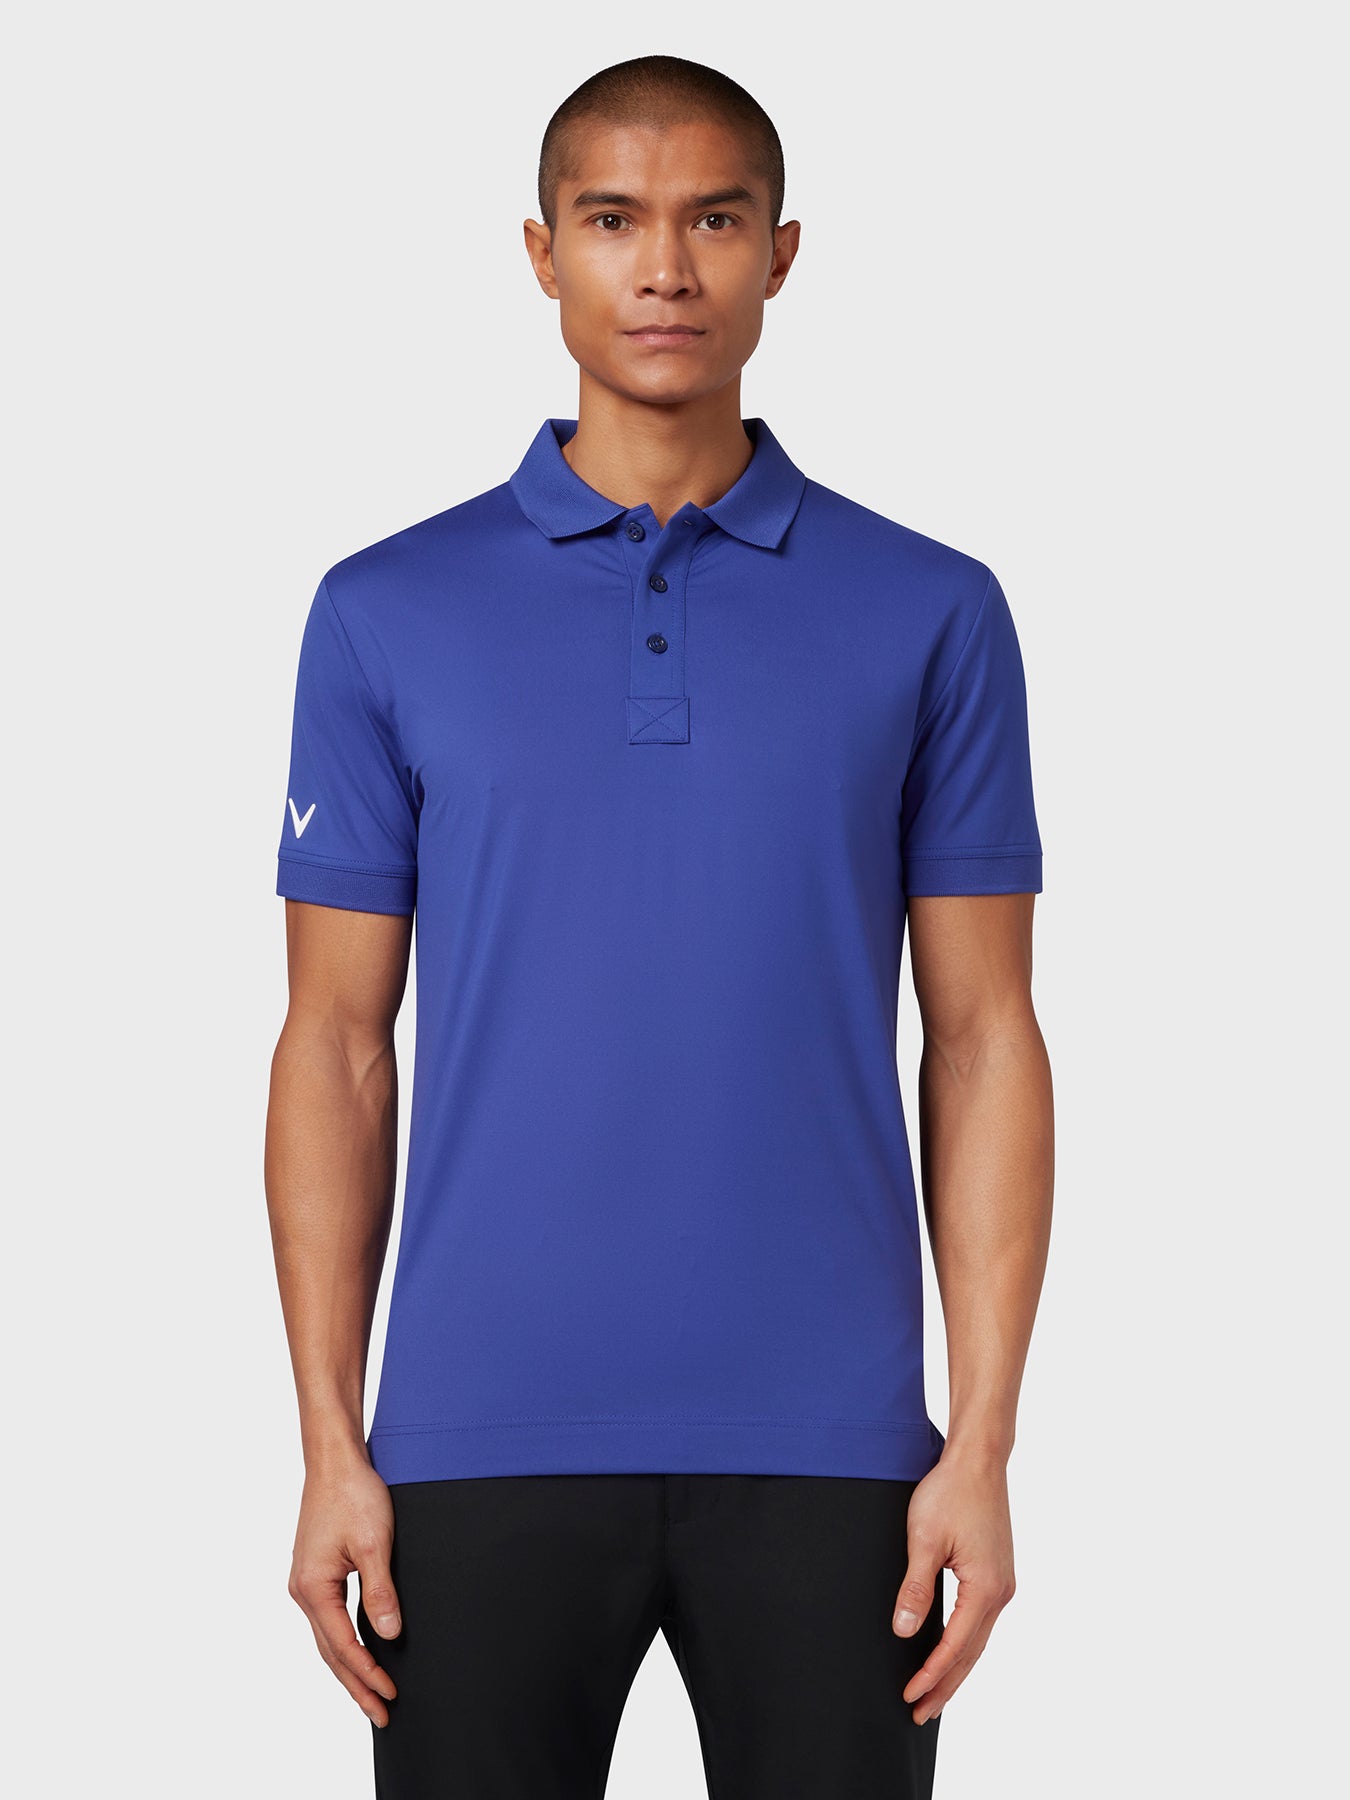 View X Series Solid Ribbed Polo In Clematis Blue Clematis Blue L information